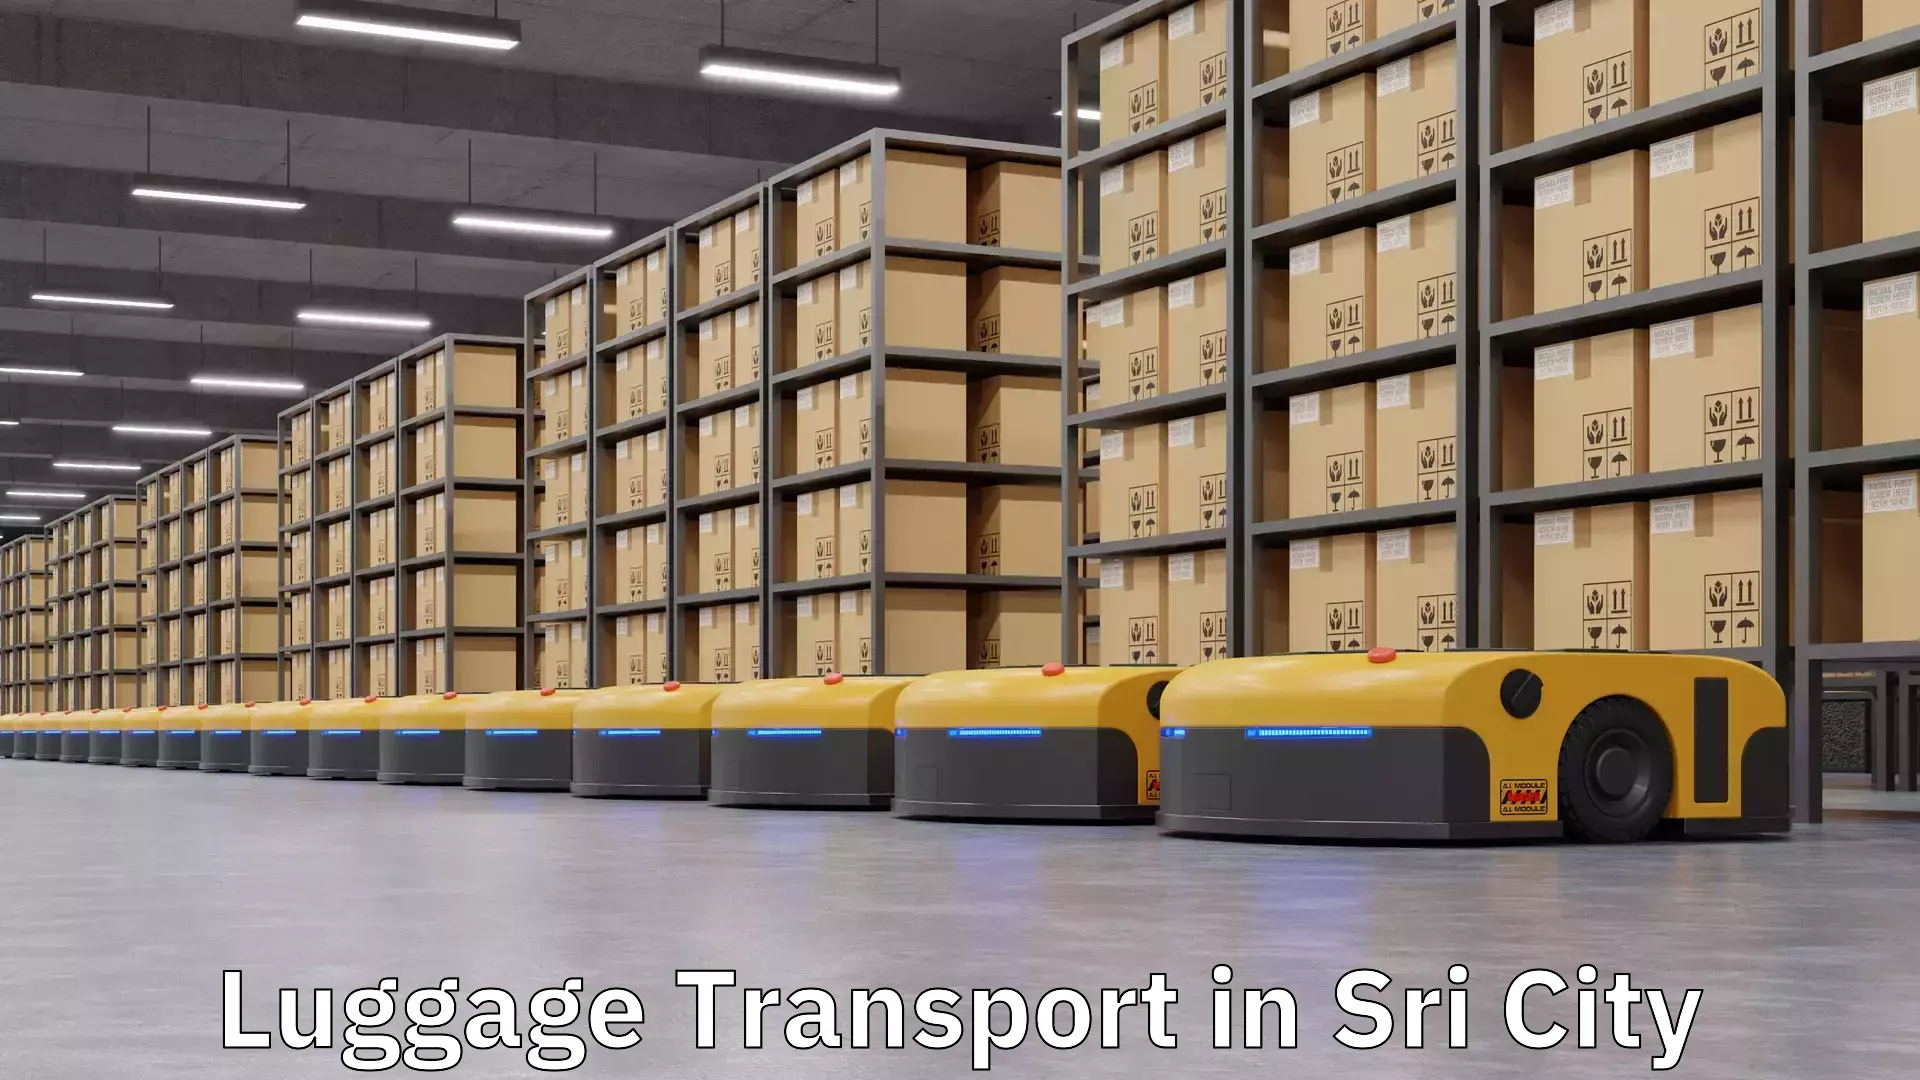 Luggage shipping rates calculator in Sri City